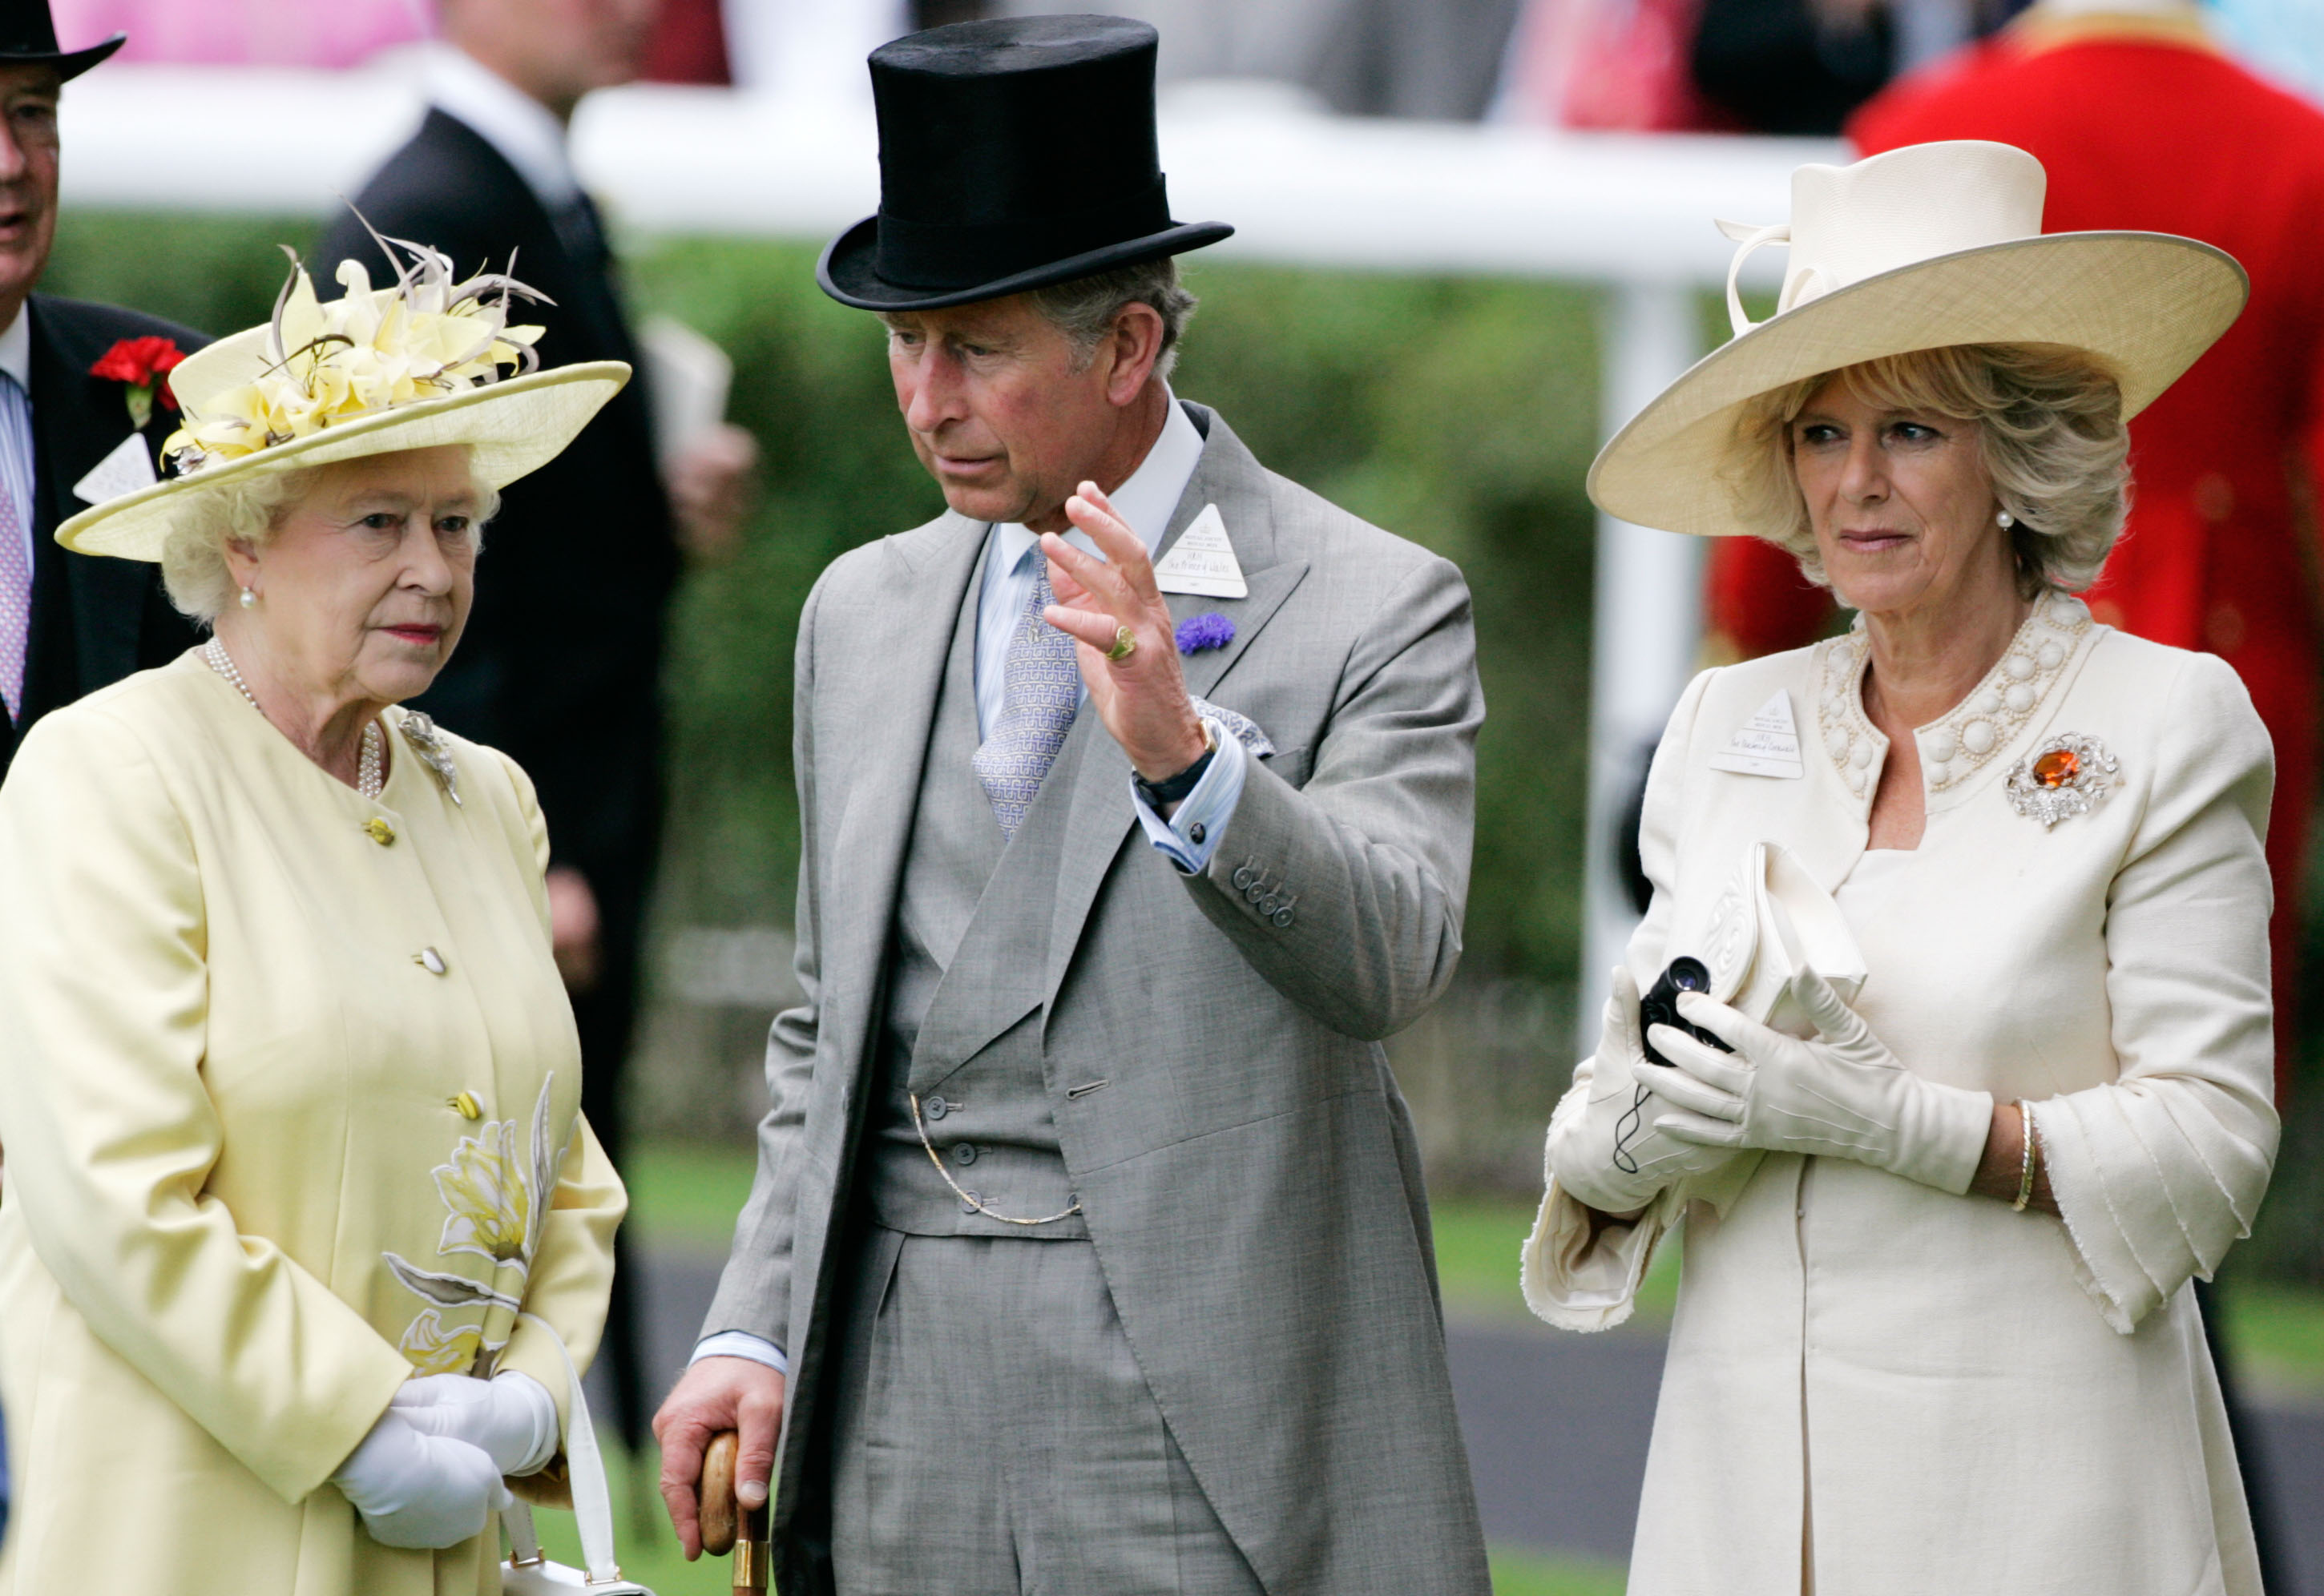 Queen Elizabeth II, Camilla Parker Bowles, and Prince Charles attend the second day of Royal Ascot Races